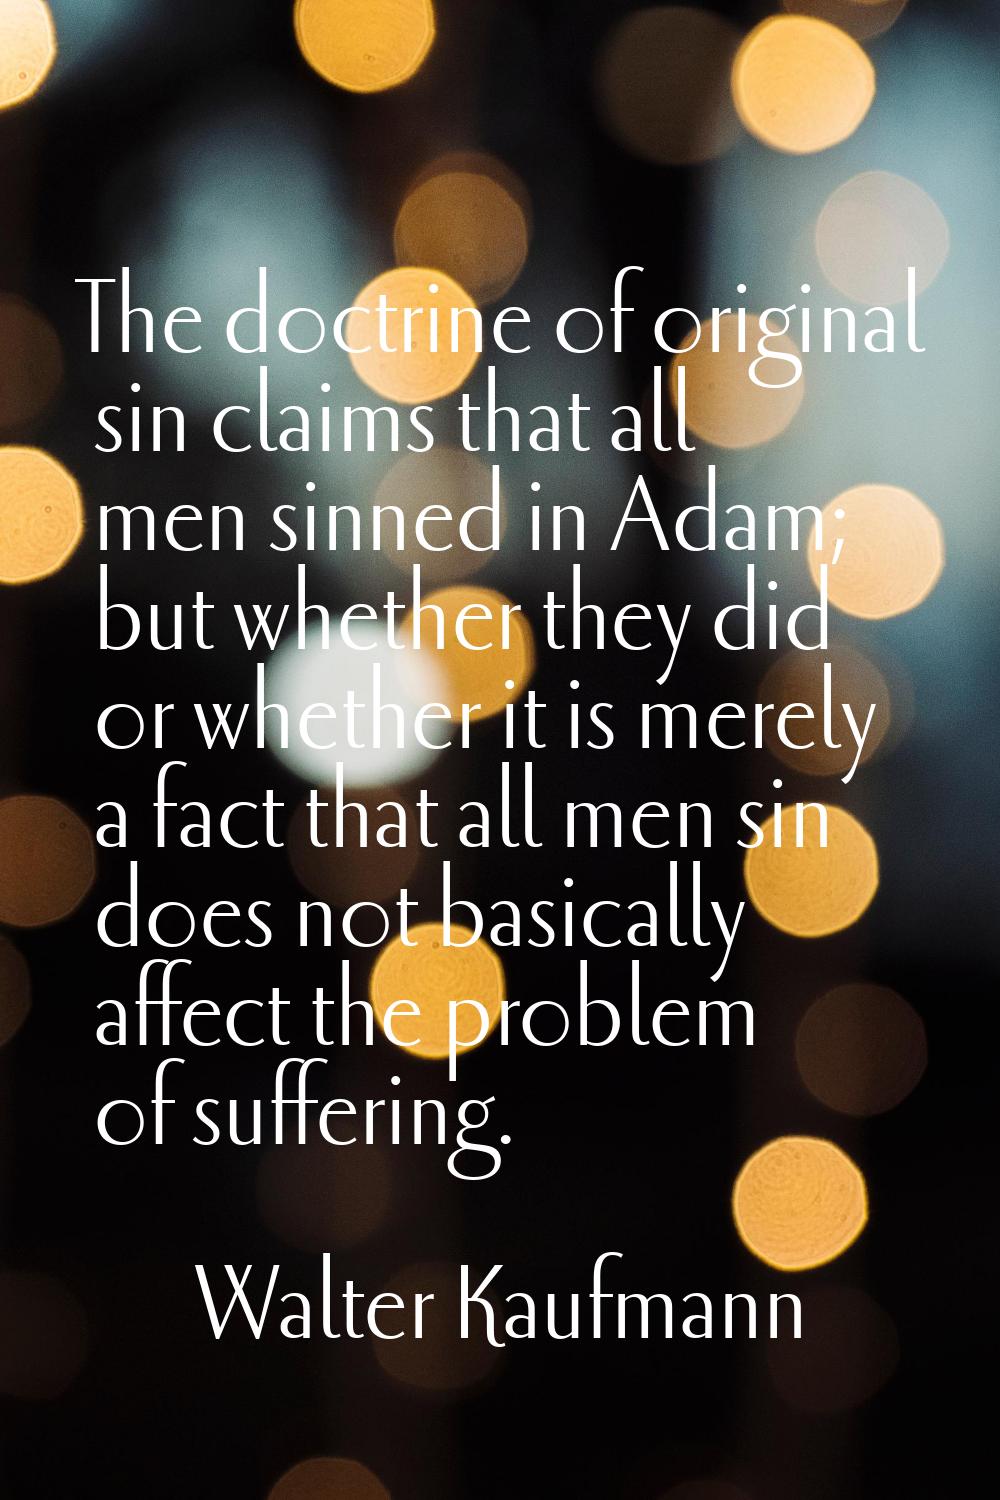 The doctrine of original sin claims that all men sinned in Adam; but whether they did or whether it